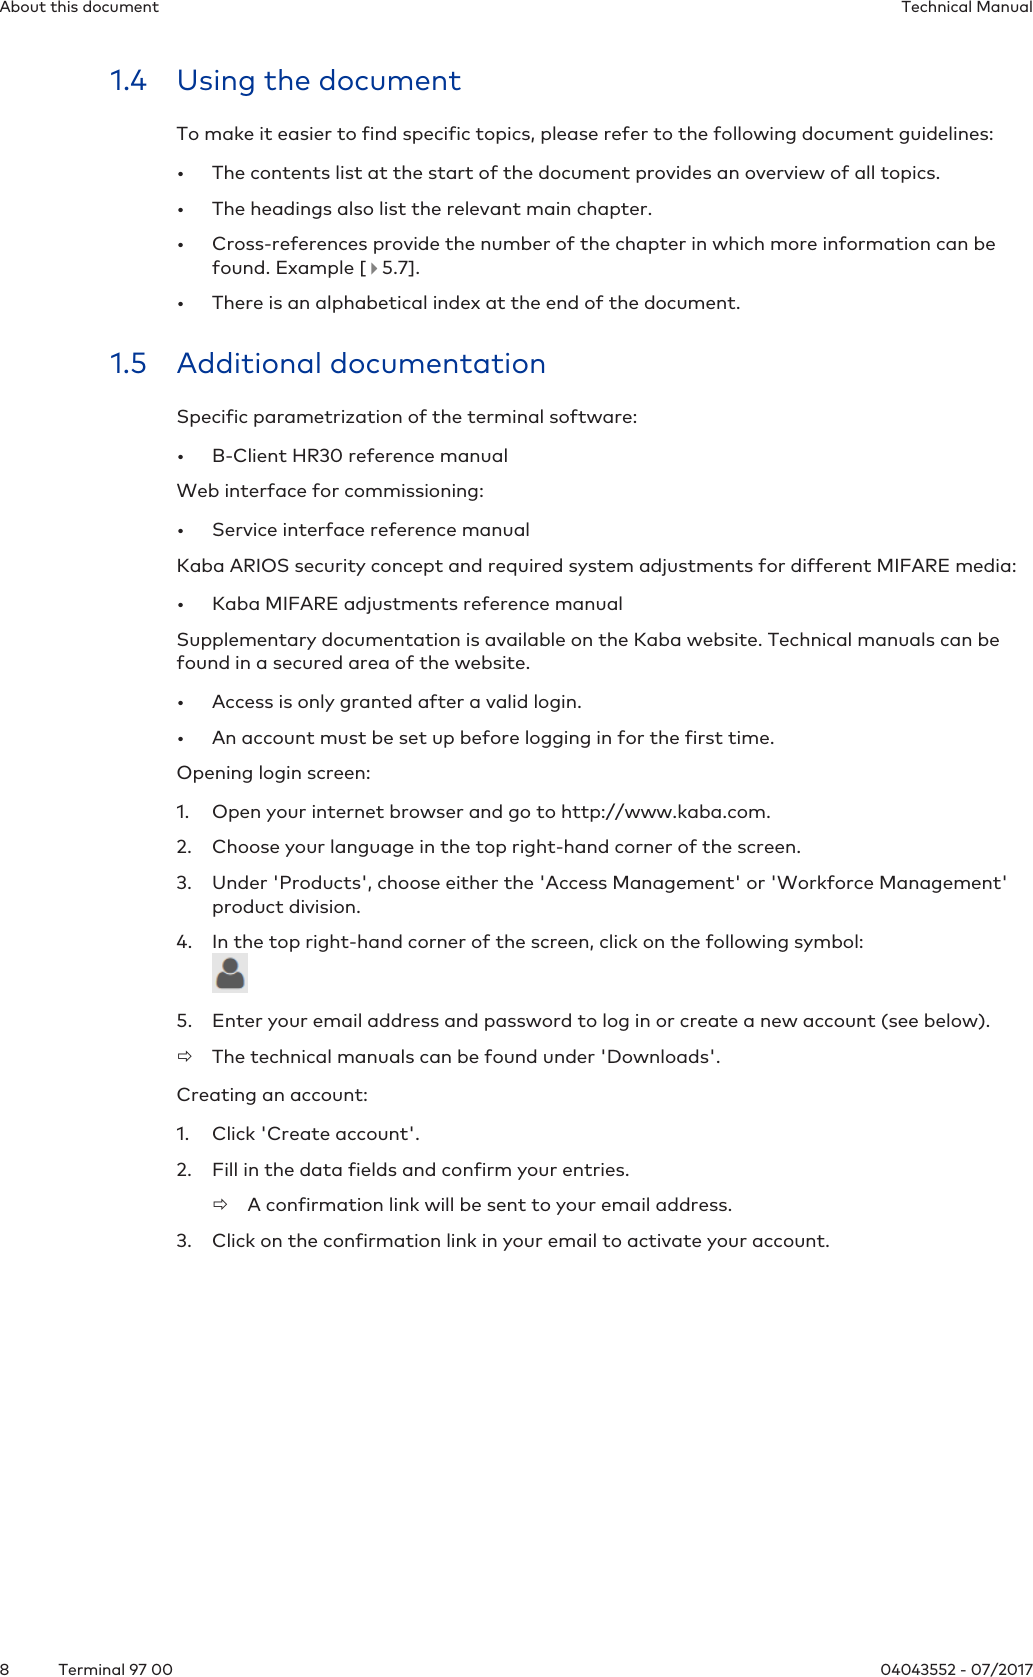 About this document Technical Manual8 04043552 - 07/2017Terminal 97 001.4 Using the documentTo make it easier to find specific topics, please refer to the following document guidelines:• The contents list at the start of the document provides an overview of all topics.• The headings also list the relevant main chapter.• Cross-references provide the number of the chapter in which more information can befound. Example [   5.7].• There is an alphabetical index at the end of the document.1.5 Additional documentationSpecific parametrization of the terminal software:• B-Client HR30 reference manualWeb interface for commissioning:• Service interface reference manualKaba ARIOS security concept and required system adjustments for different MIFARE media:• Kaba MIFARE adjustments reference manualSupplementary documentation is available on the Kaba website. Technical manuals can befound in a secured area of the website.• Access is only granted after a valid login.• An account must be set up before logging in for the first time.Opening login screen:1. Open your internet browser and go to http://www.kaba.com.2. Choose your language in the top right-hand corner of the screen.3. Under &apos;Products&apos;, choose either the &apos;Access Management&apos; or &apos;Workforce Management&apos;product division.4. In the top right-hand corner of the screen, click on the following symbol:5. Enter your email address and password to log in or create a new account (see below).ðThe technical manuals can be found under &apos;Downloads&apos;.Creating an account:1. Click &apos;Create account&apos;.2. Fill in the data fields and confirm your entries.ðA confirmation link will be sent to your email address.3. Click on the confirmation link in your email to activate your account.